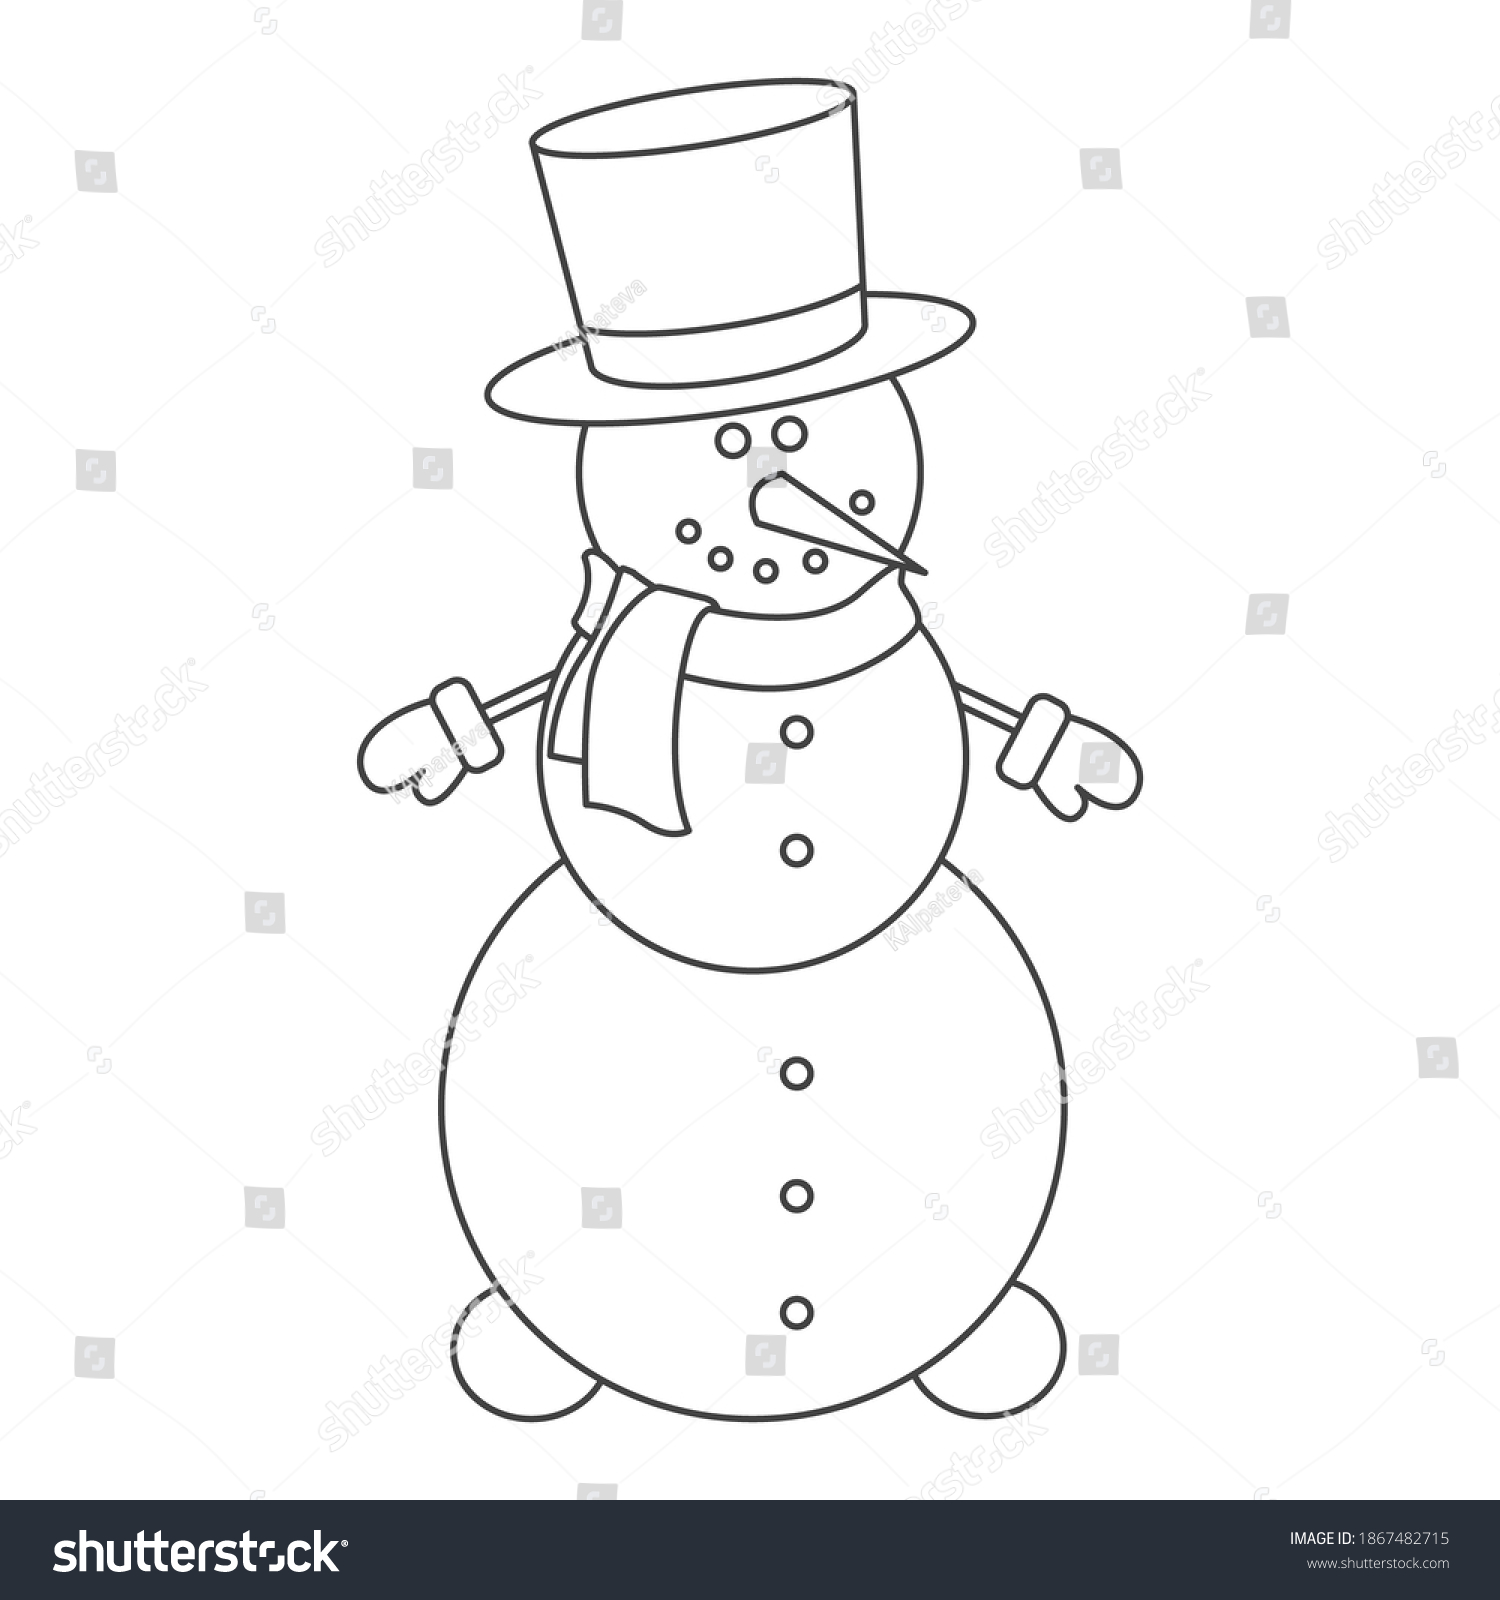 Black White Coloring Page Outline Snowman Stock Illustration 1867482715 ...